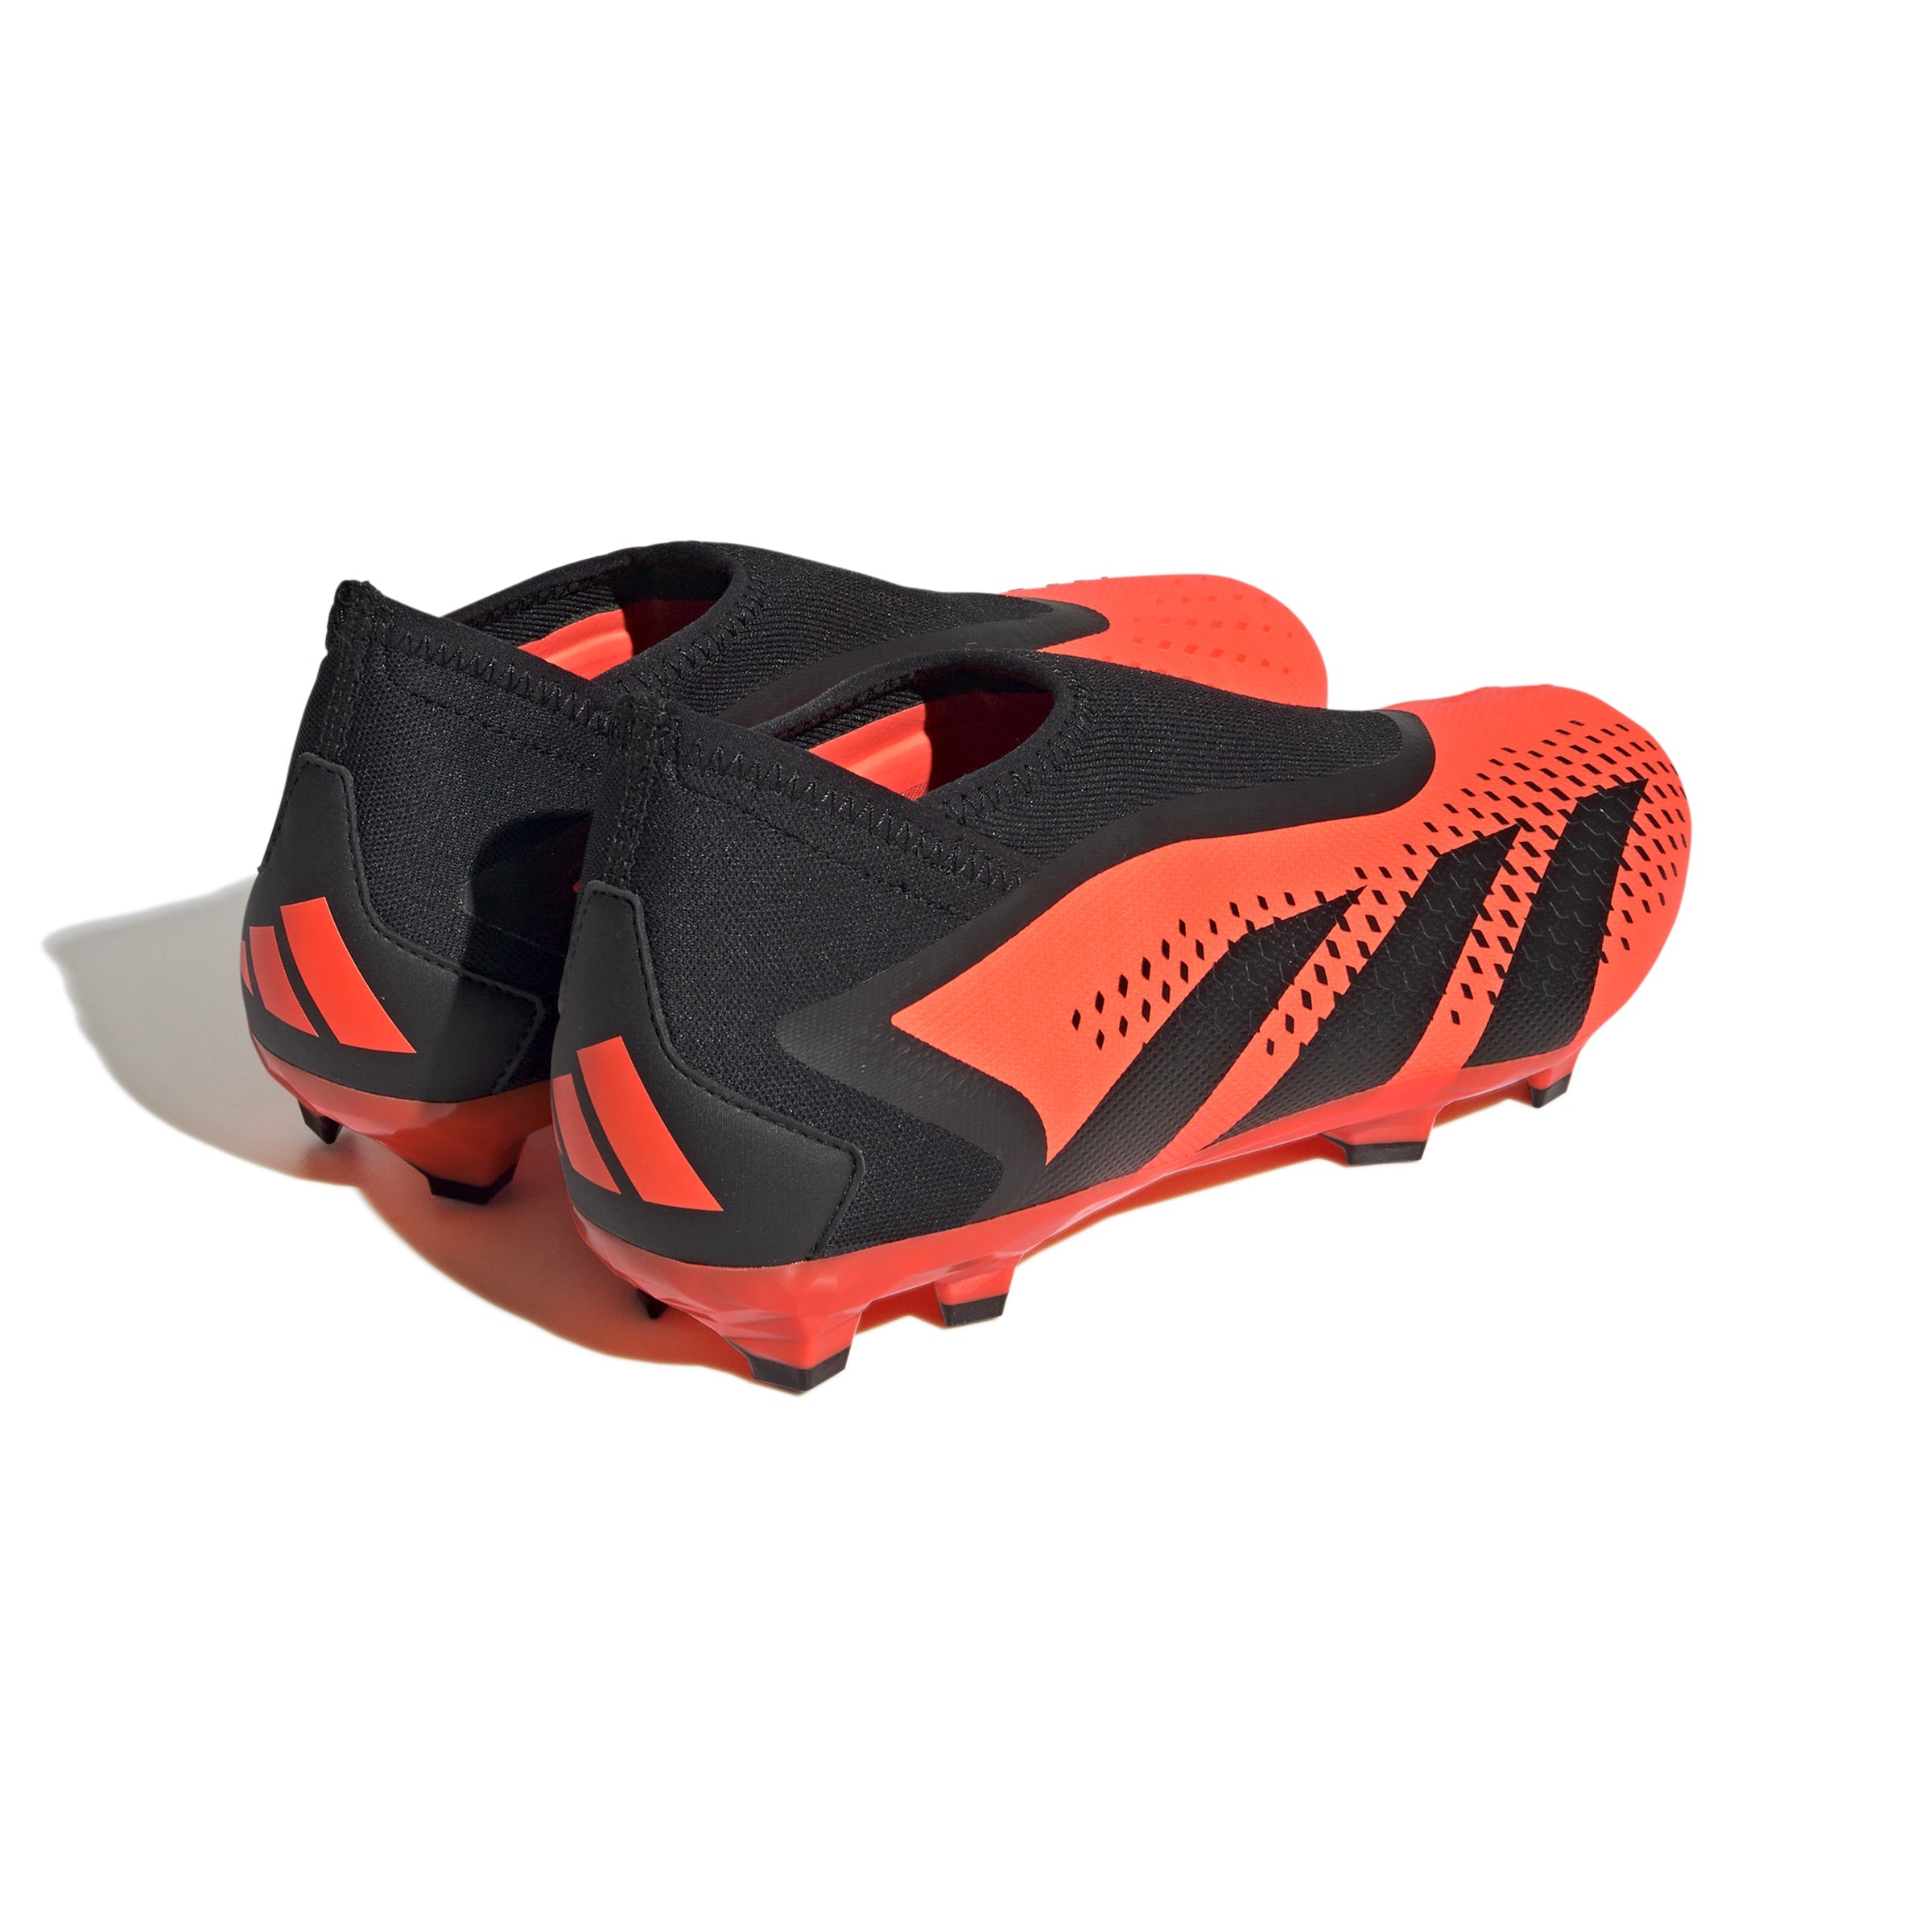 adidas Predator Accuracy.3 Laceless FG Firm Ground Soccer Cleats